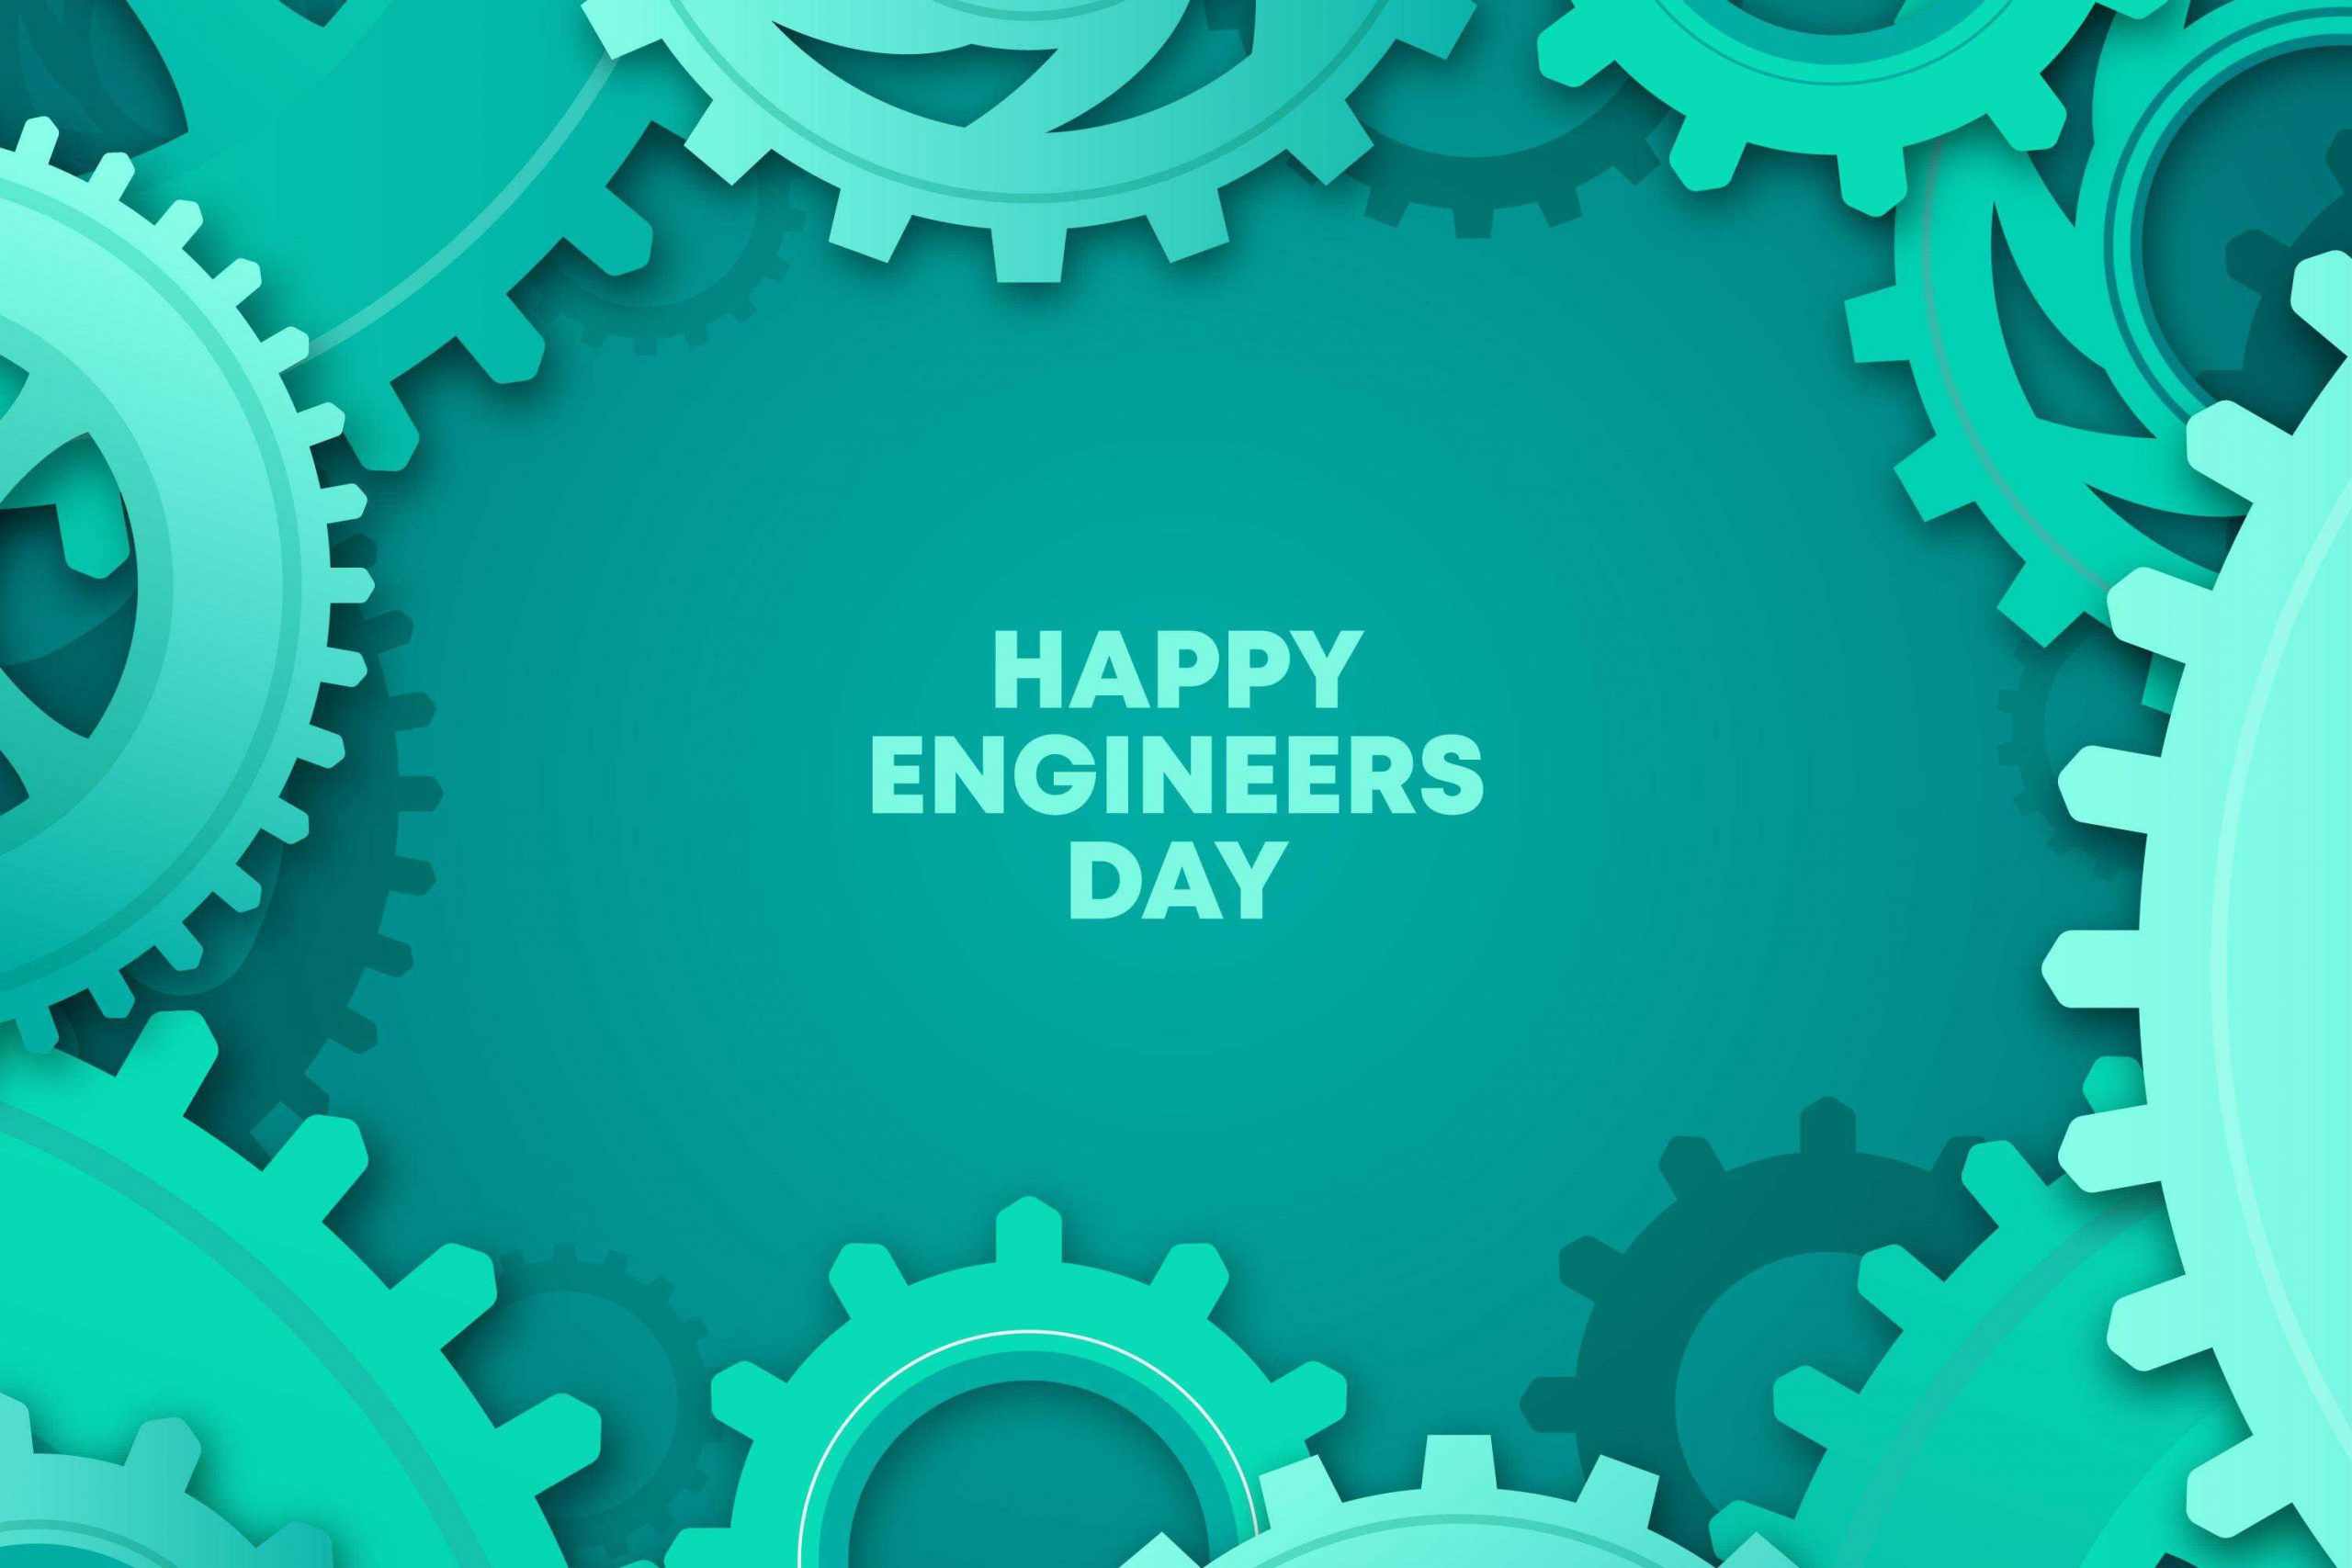 Engineer's day 2020: Engineer's day images, wishes and status to wish